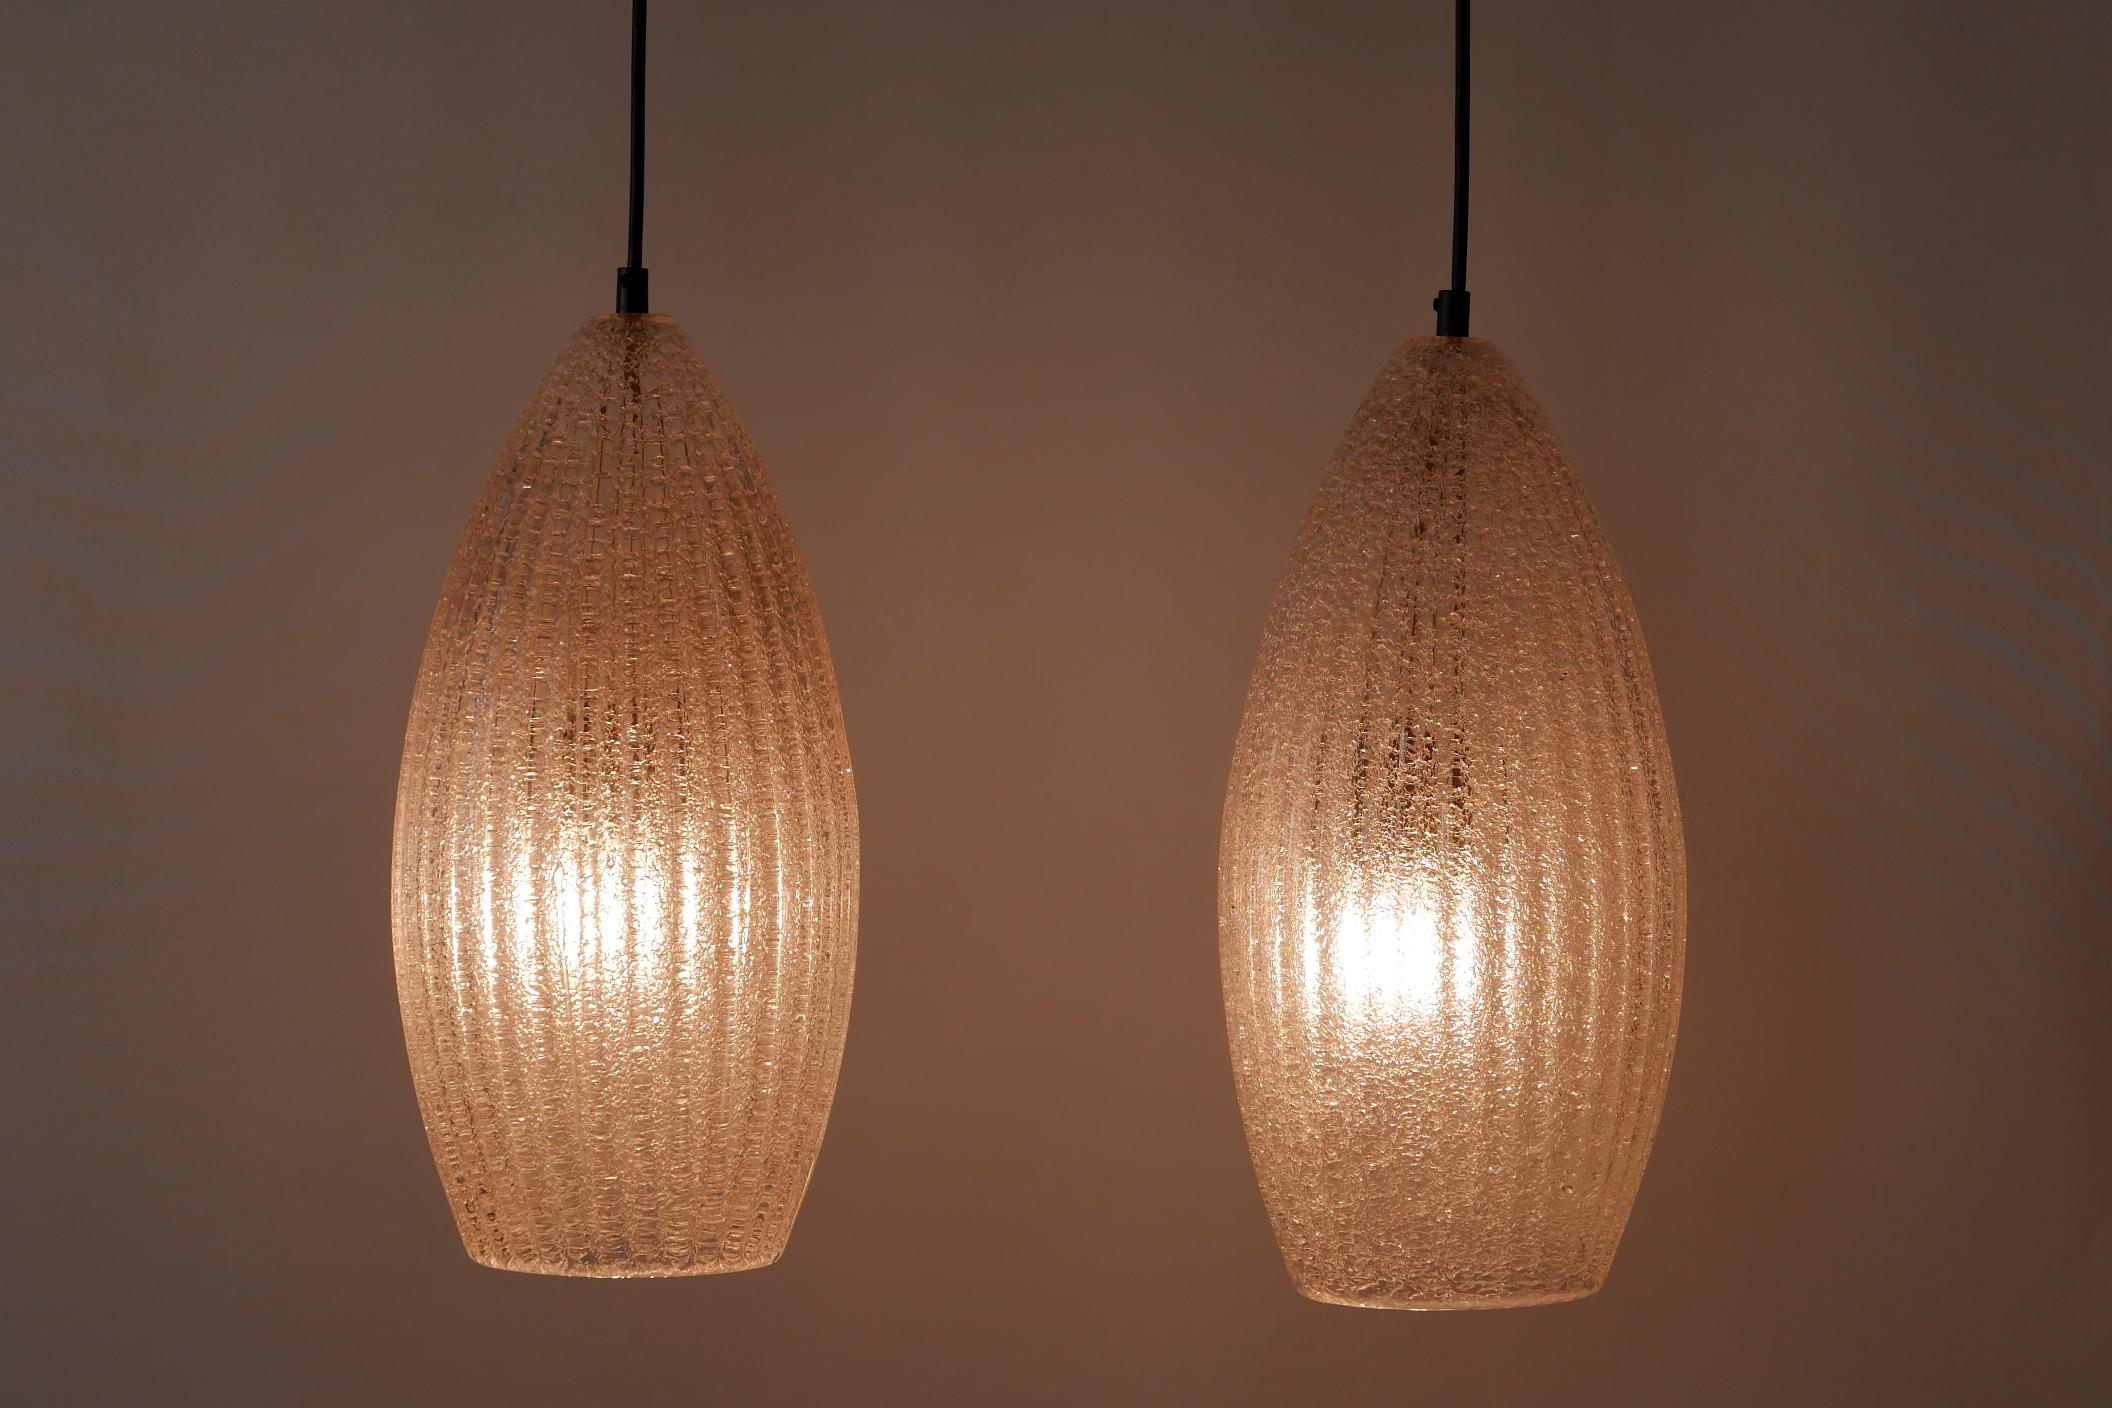 Set of Two Mid-Century Modern Textured Glass Pendant Lamps, 1960s, Germany For Sale 1